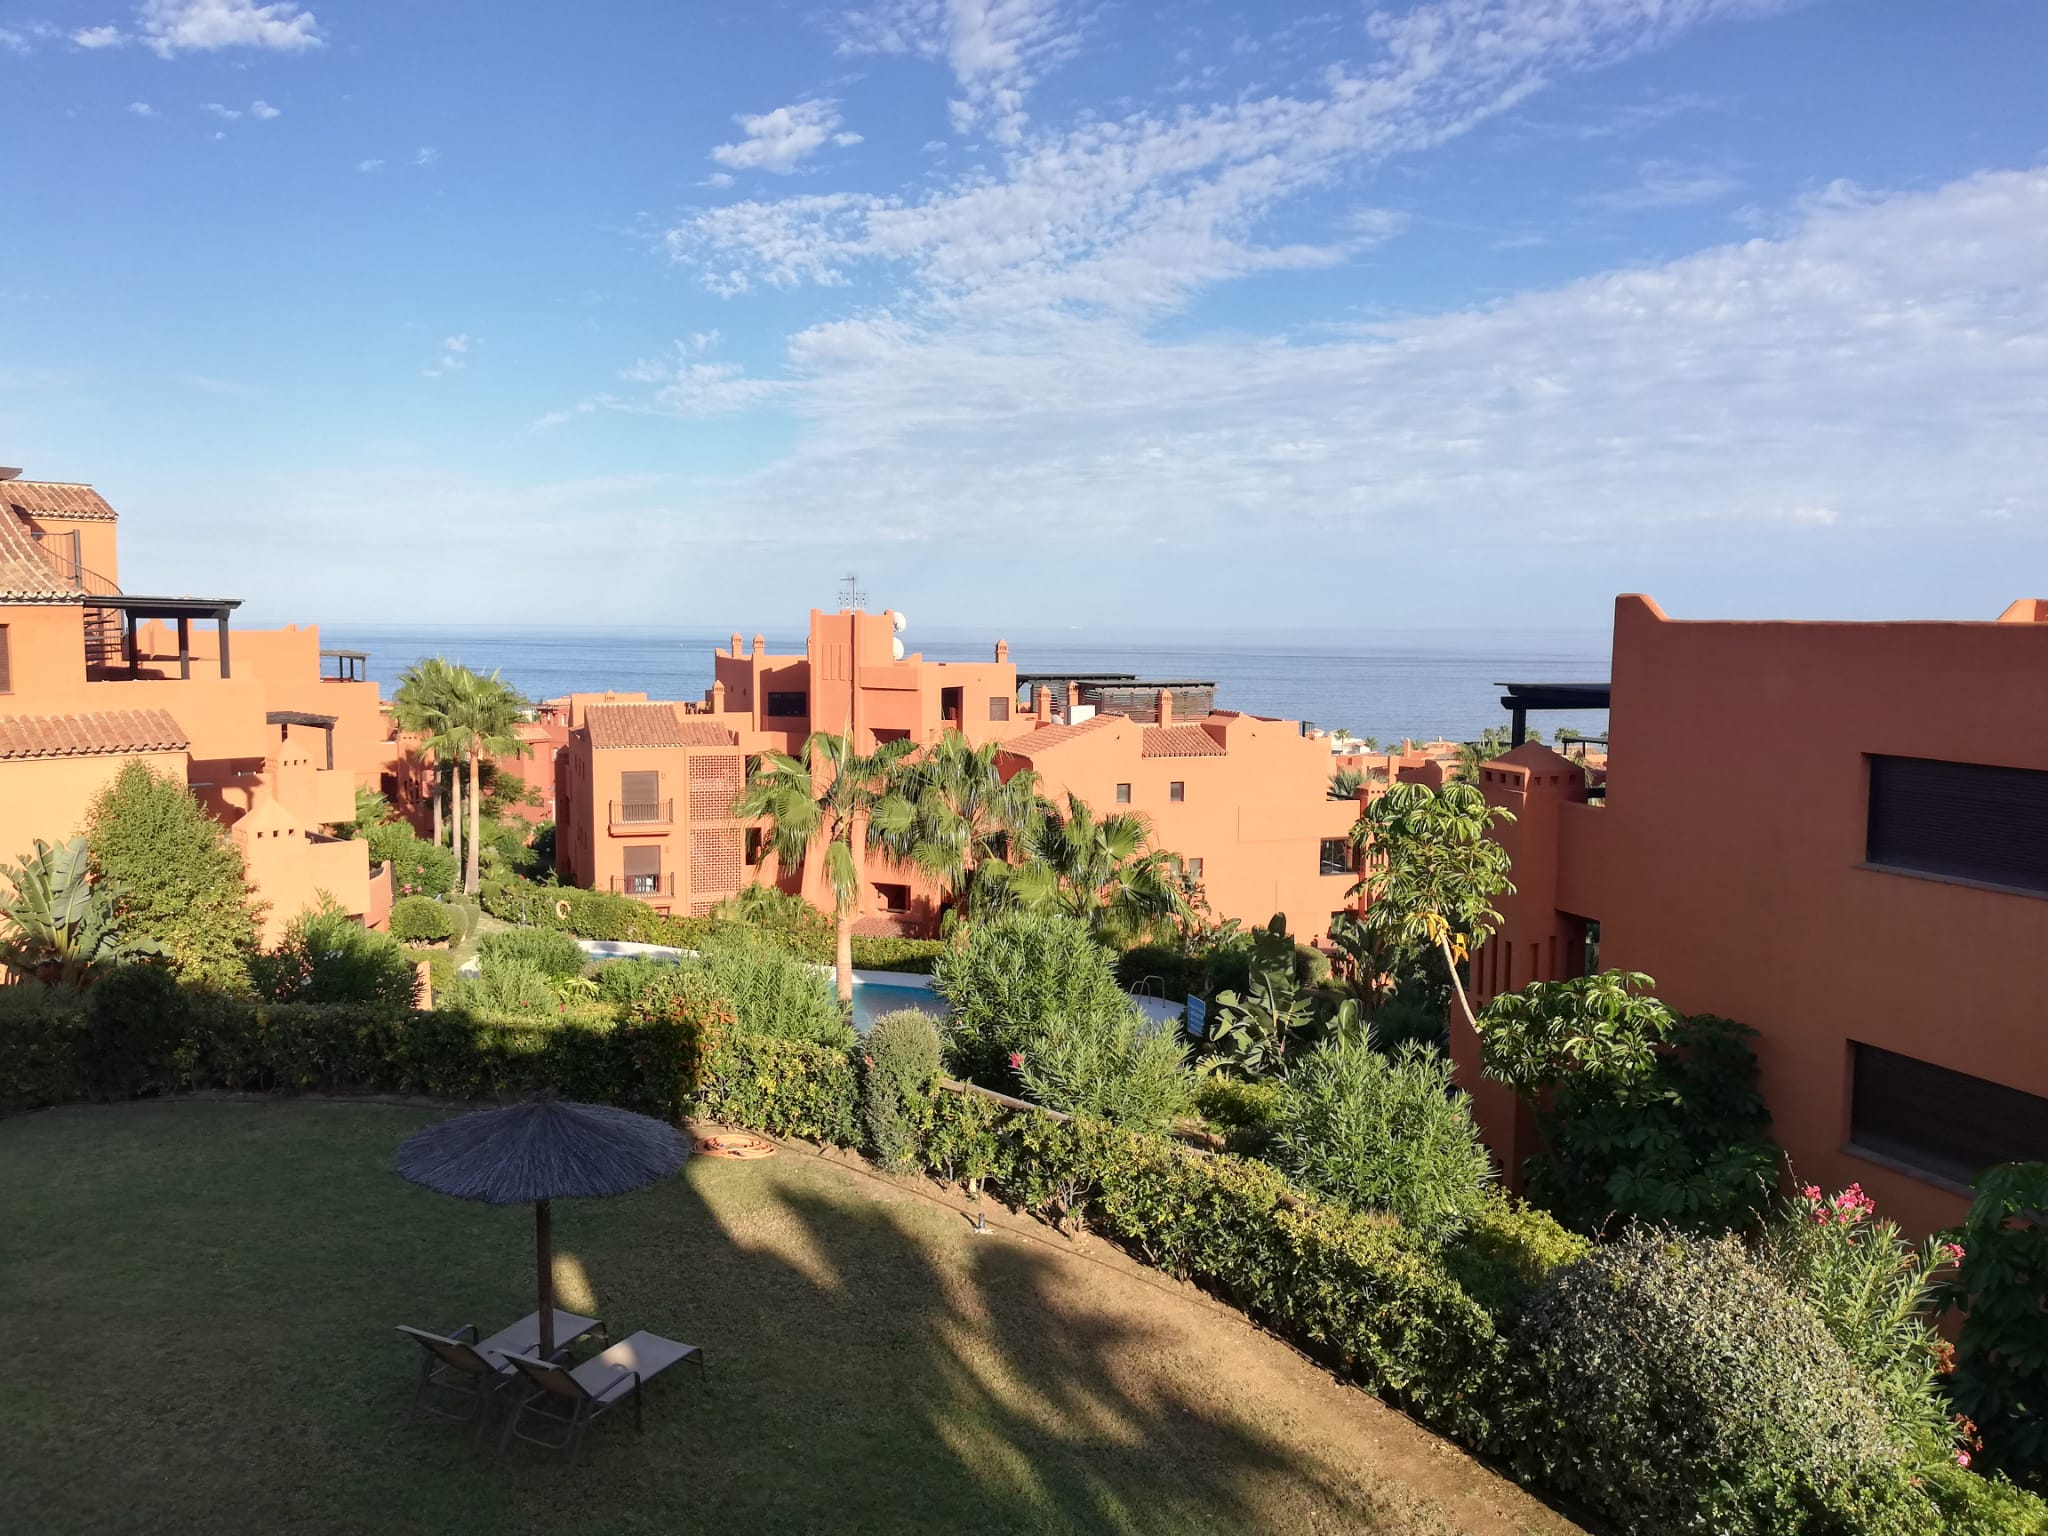 2 bedroom apartment for rent in Estepona 200 meters from the beach - thumb - mibgroup.es